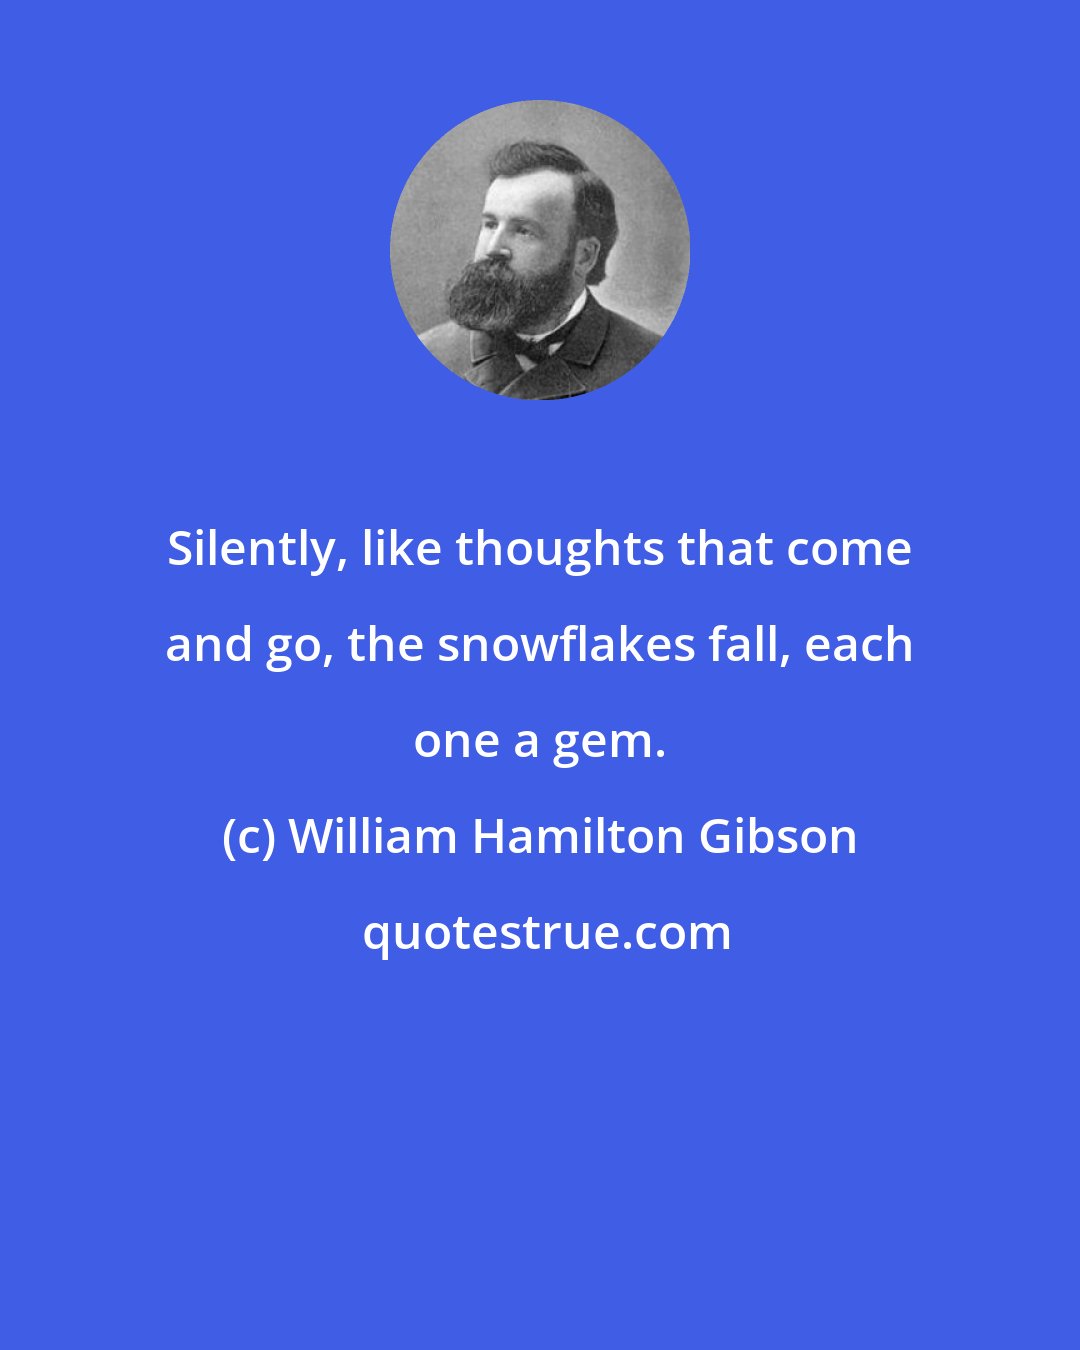 William Hamilton Gibson: Silently, like thoughts that come and go, the snowflakes fall, each one a gem.